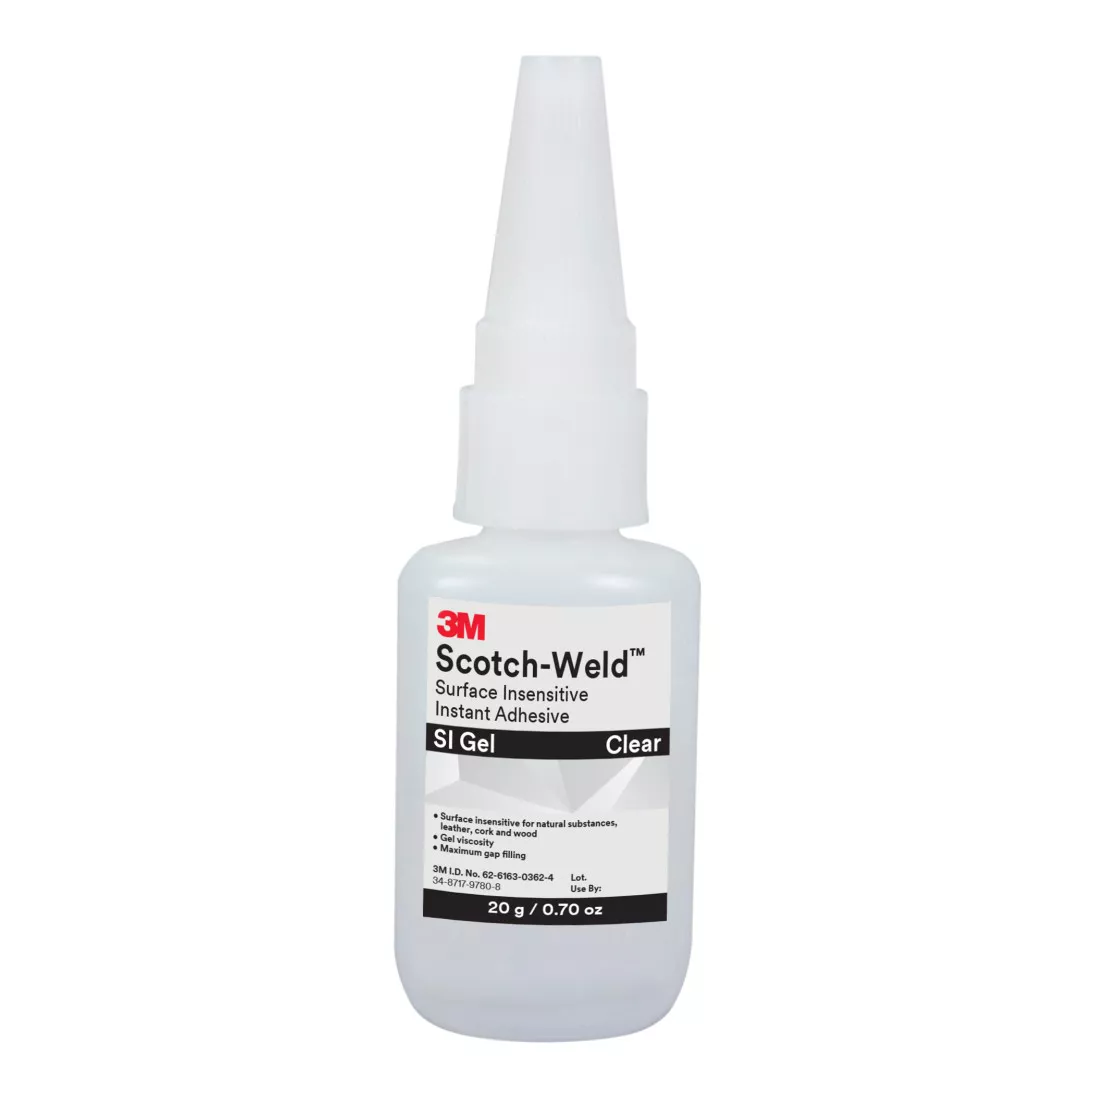 3M™ Scotch-Weld™ Surface Insensitive Instant Adhesive SI Gel, Clear, 20
Gram Tube, 10/case